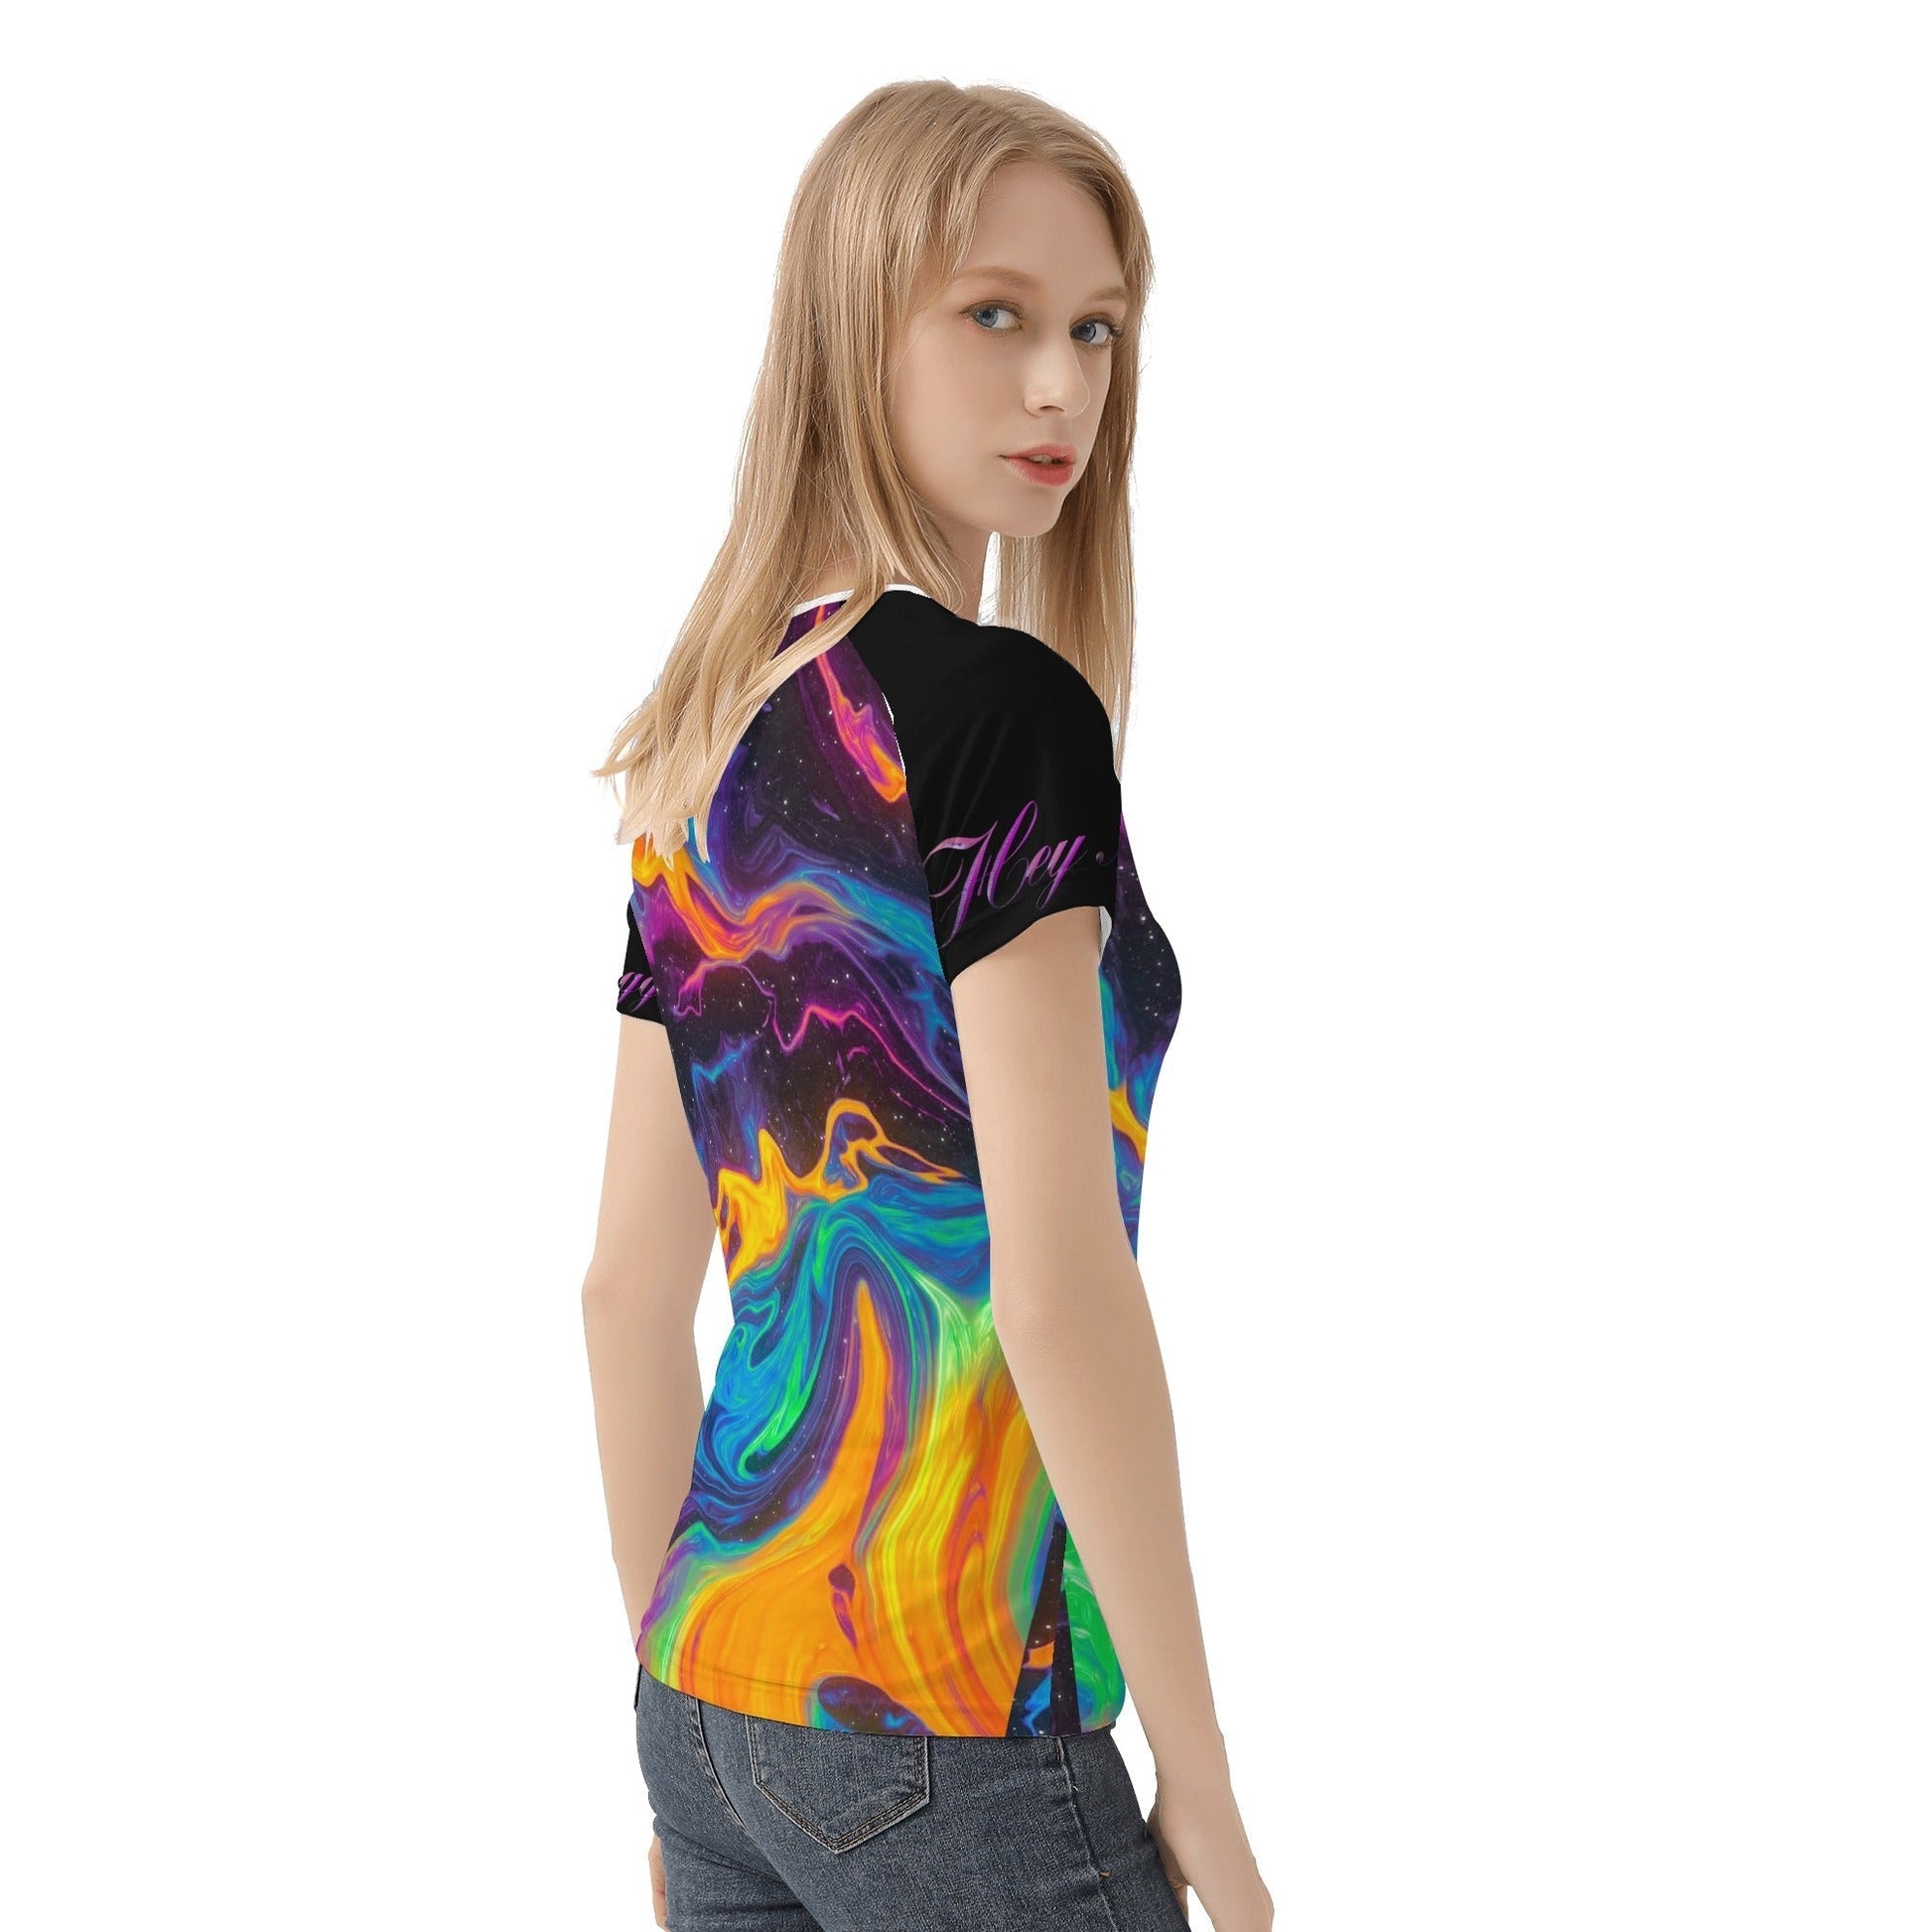 Stand out  with the  Unicorn Womens  T shirt  available at Hey Nugget. Grab yours today!